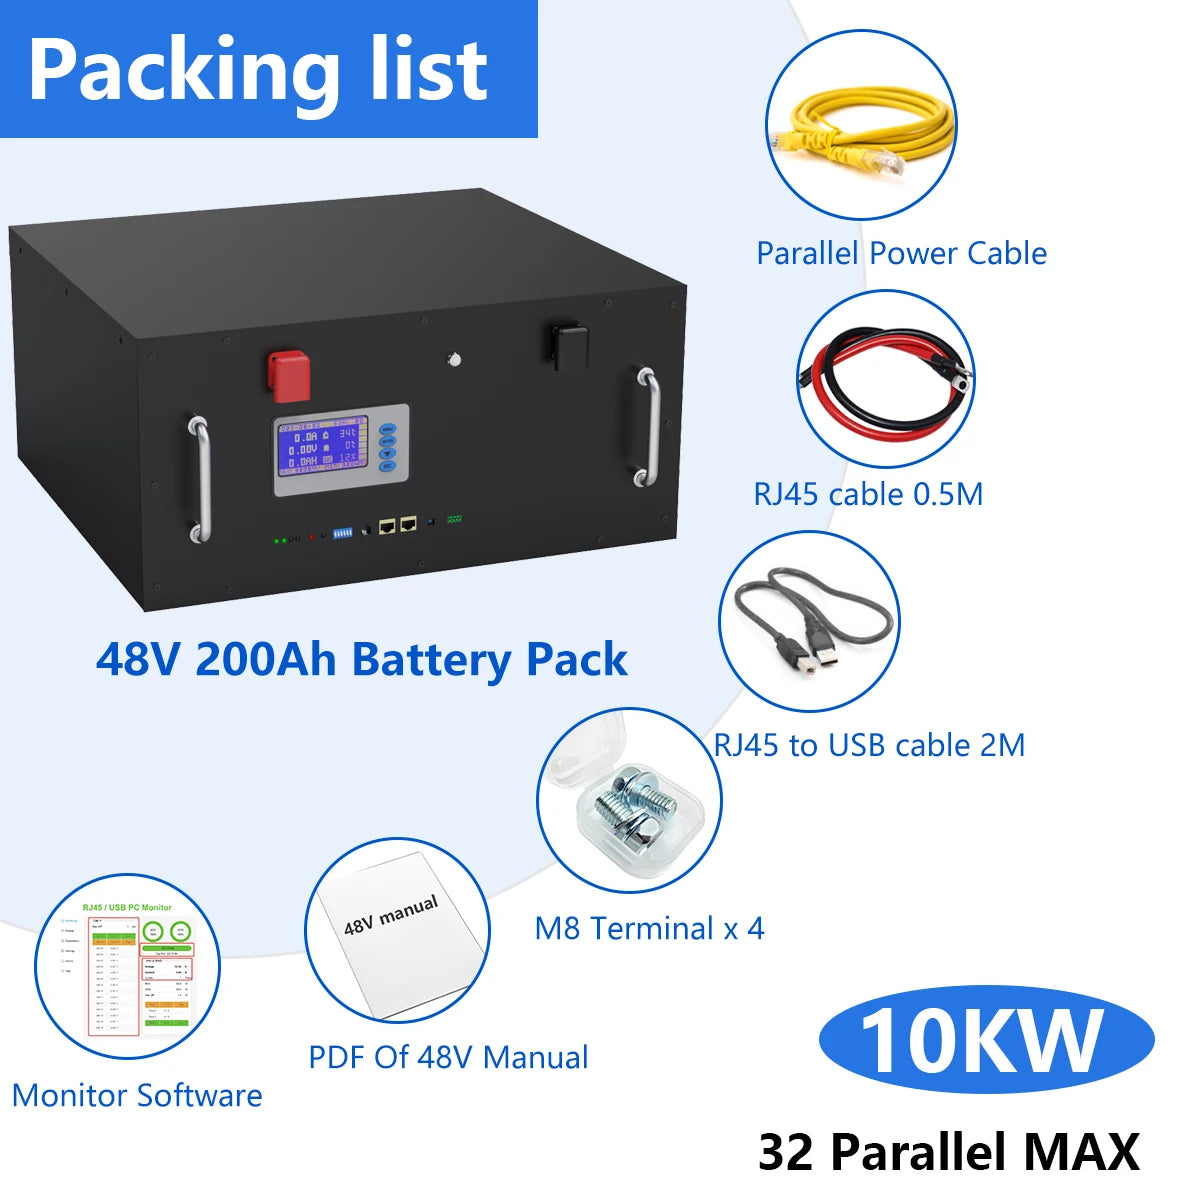 48V 200Ah LiFePO4 Battery, Packaging contents include cables, terminals, manuals, and software documentation for a 48V system with 10KW monitor and 32-parallel configuration support.